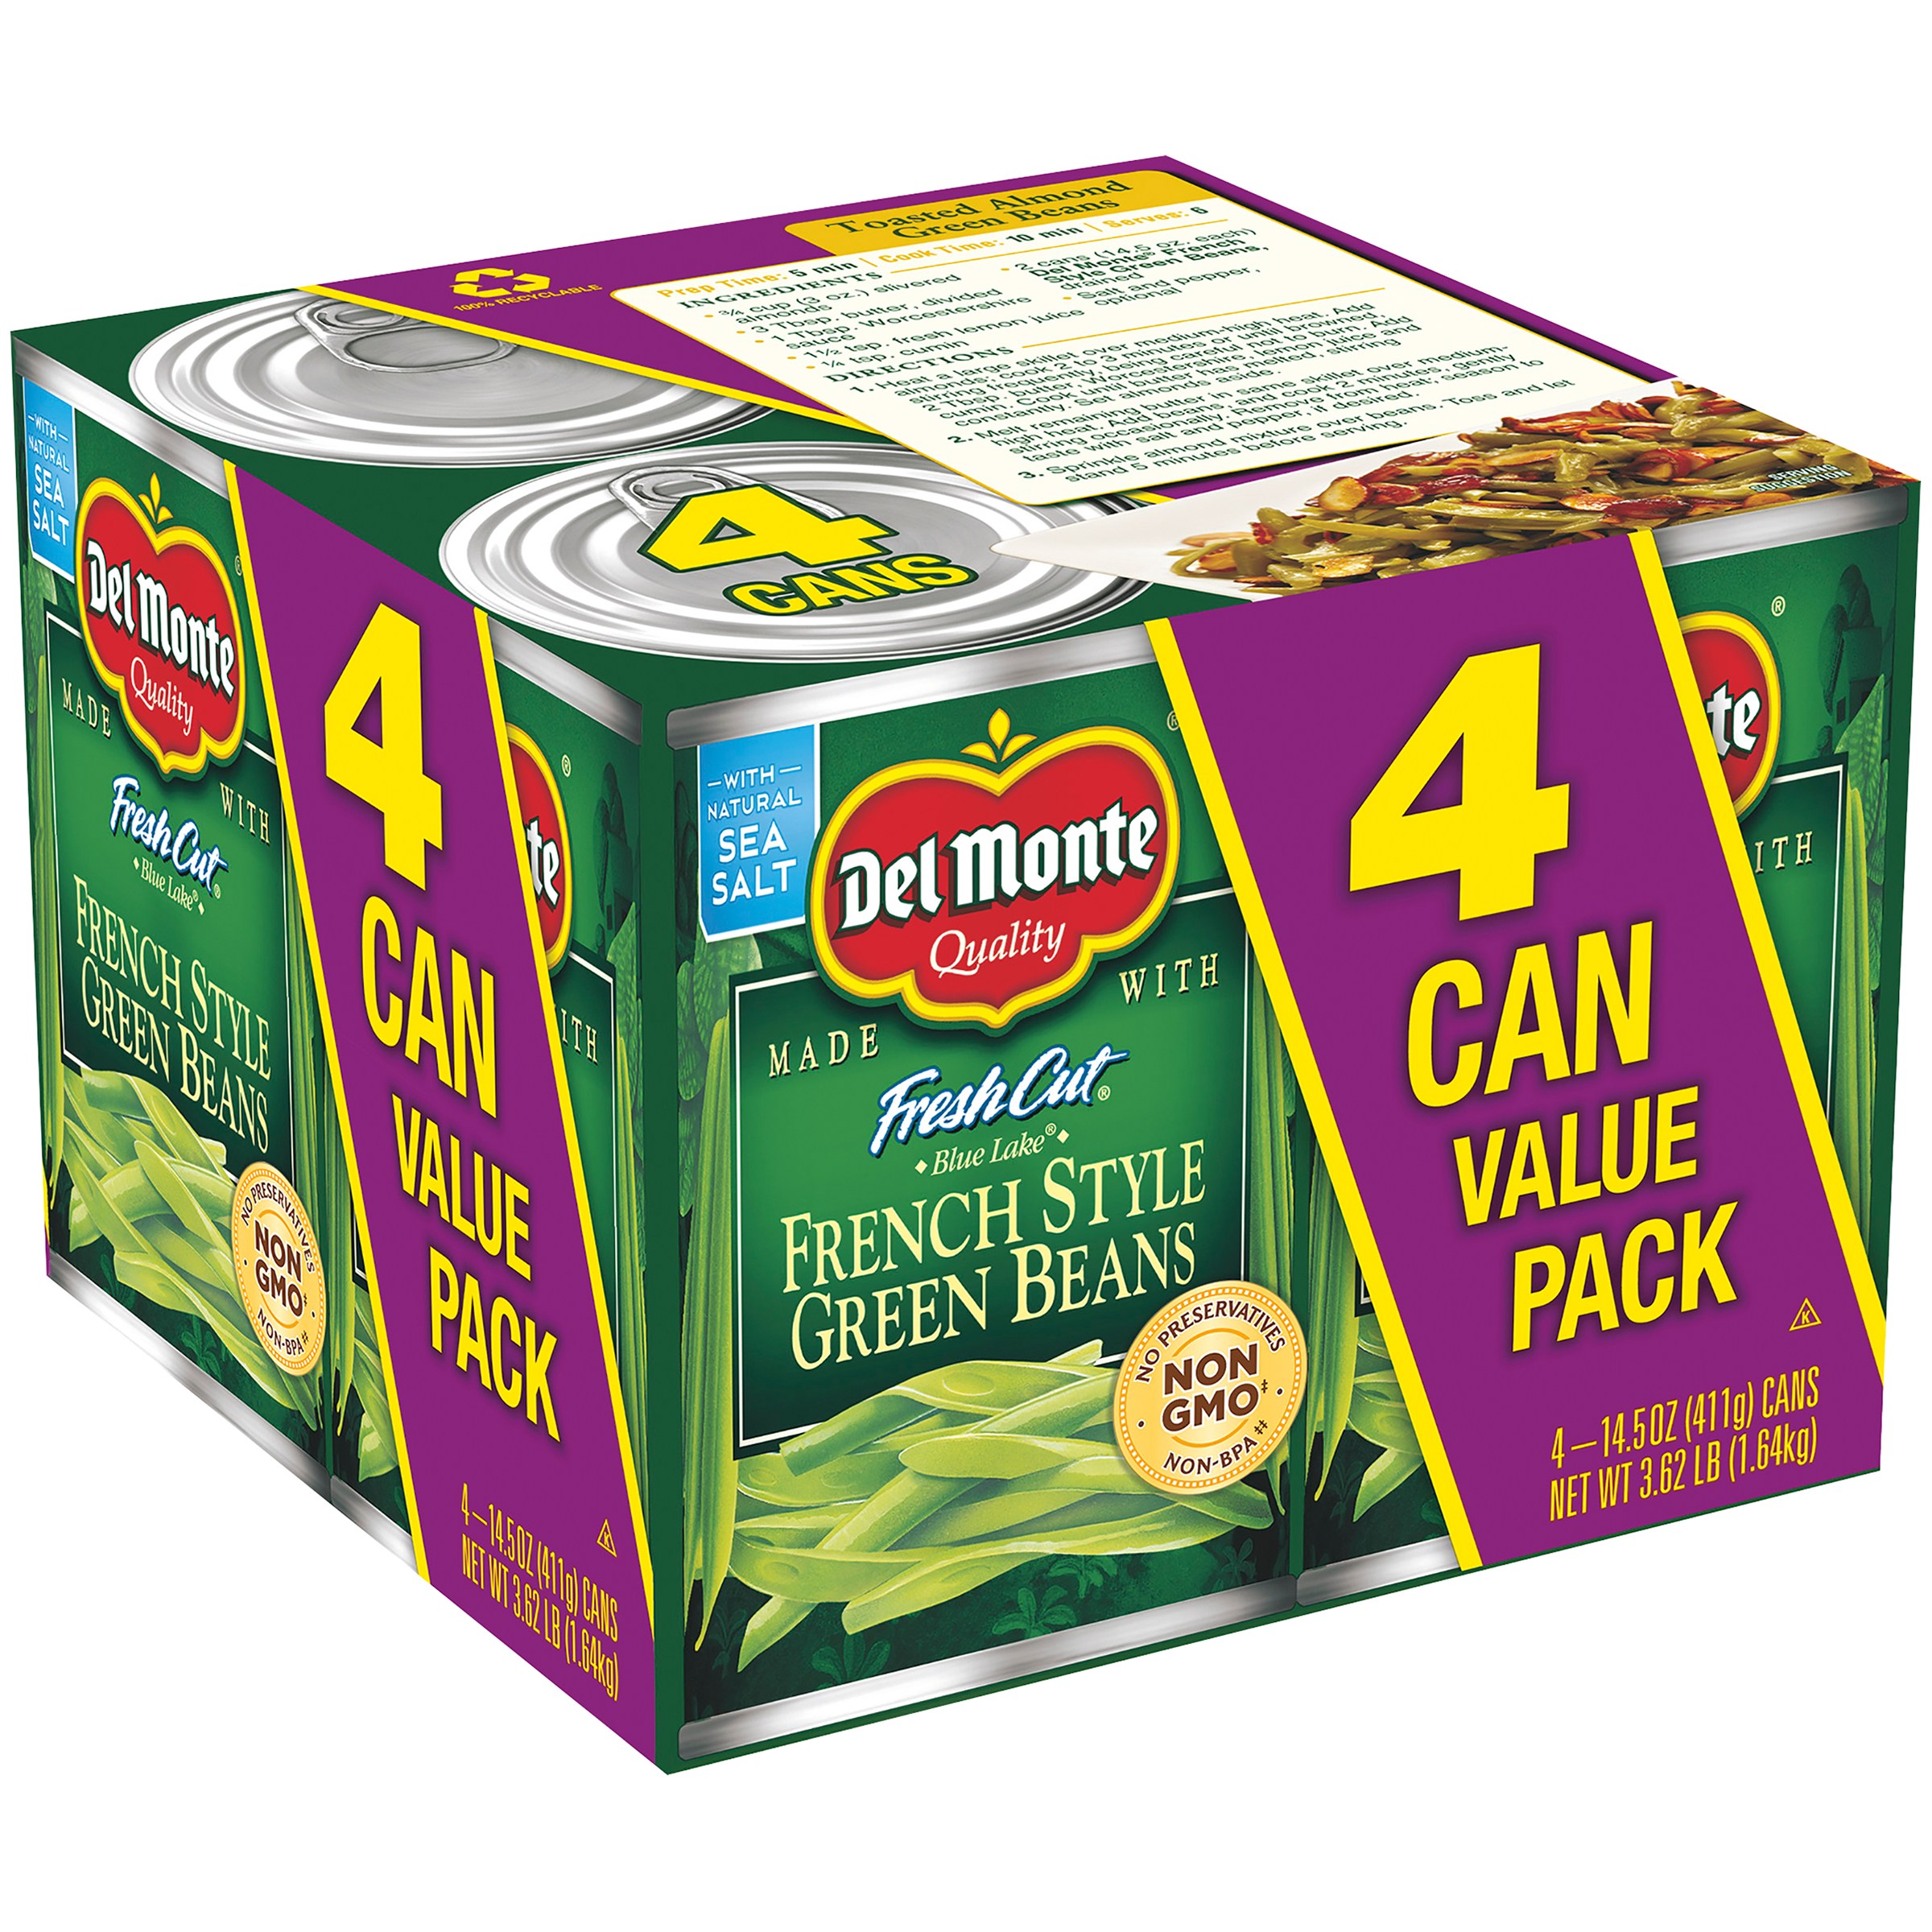 (4 Cans) Del Monte French Style Green Beans, 14.5 oz Can - image 1 of 7